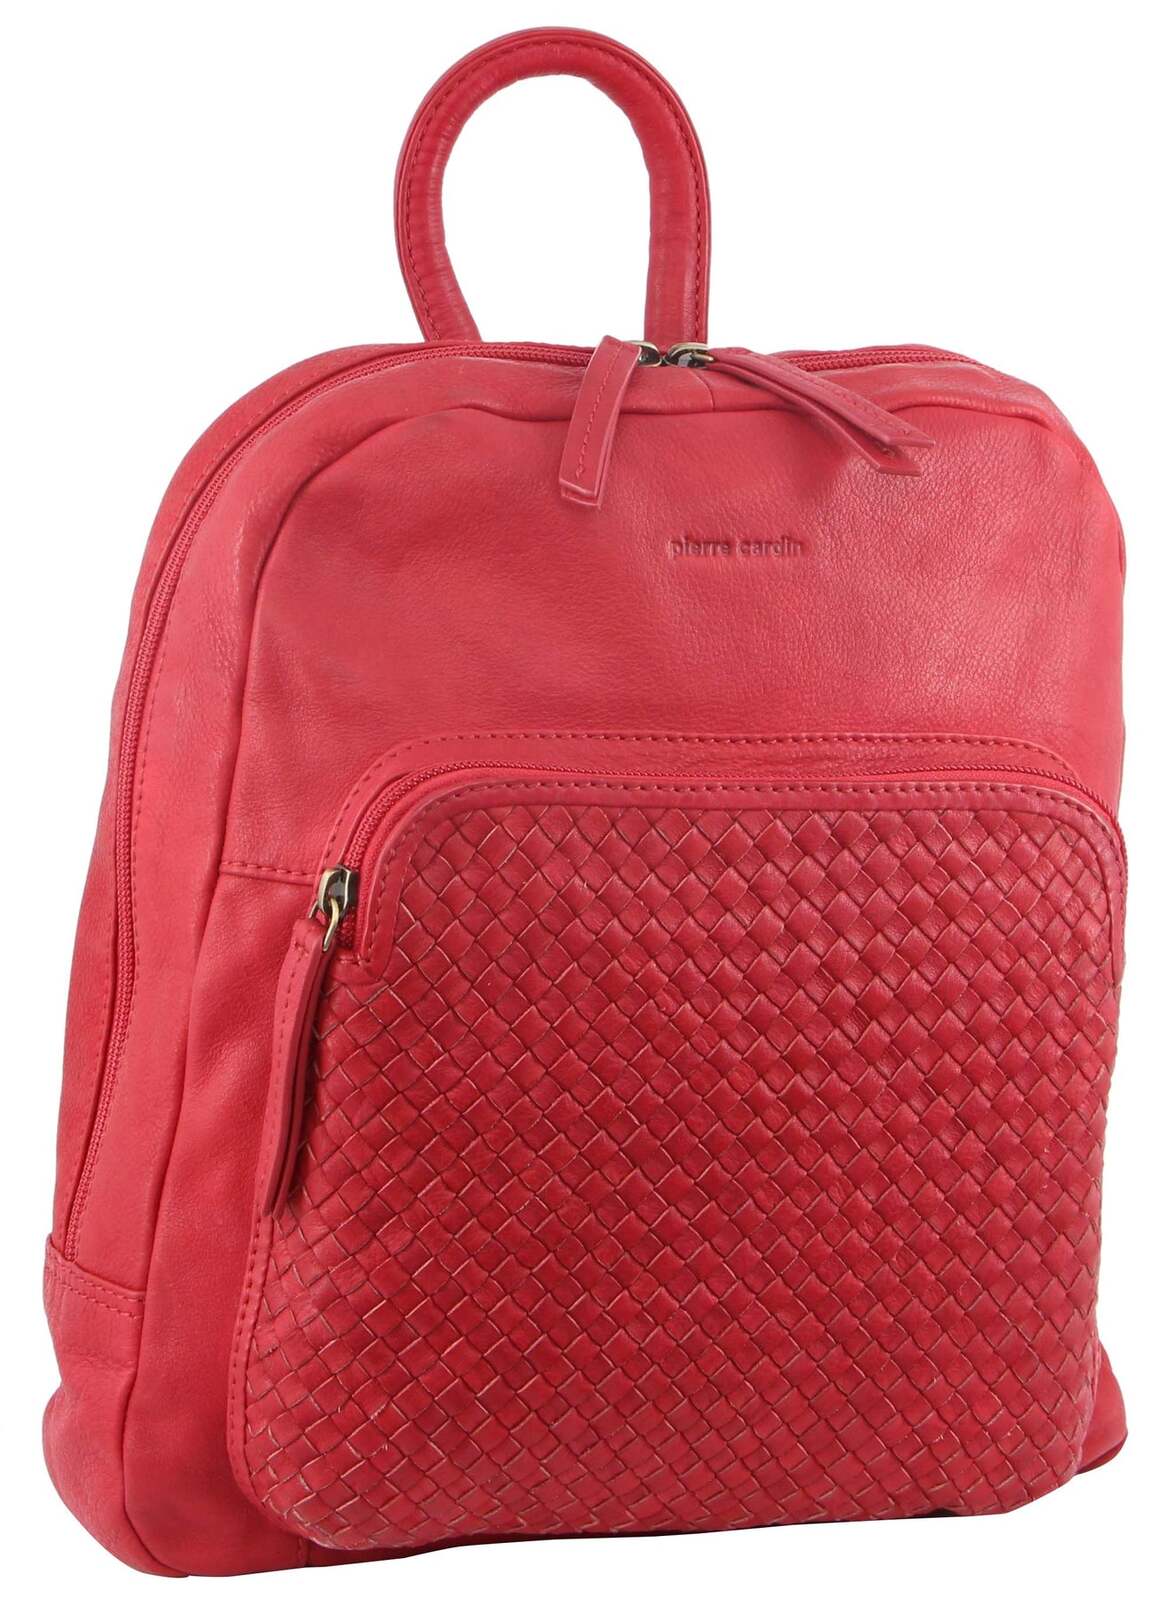 Womens Woven Soft Leather Backpack Bag Travel Designer - Red